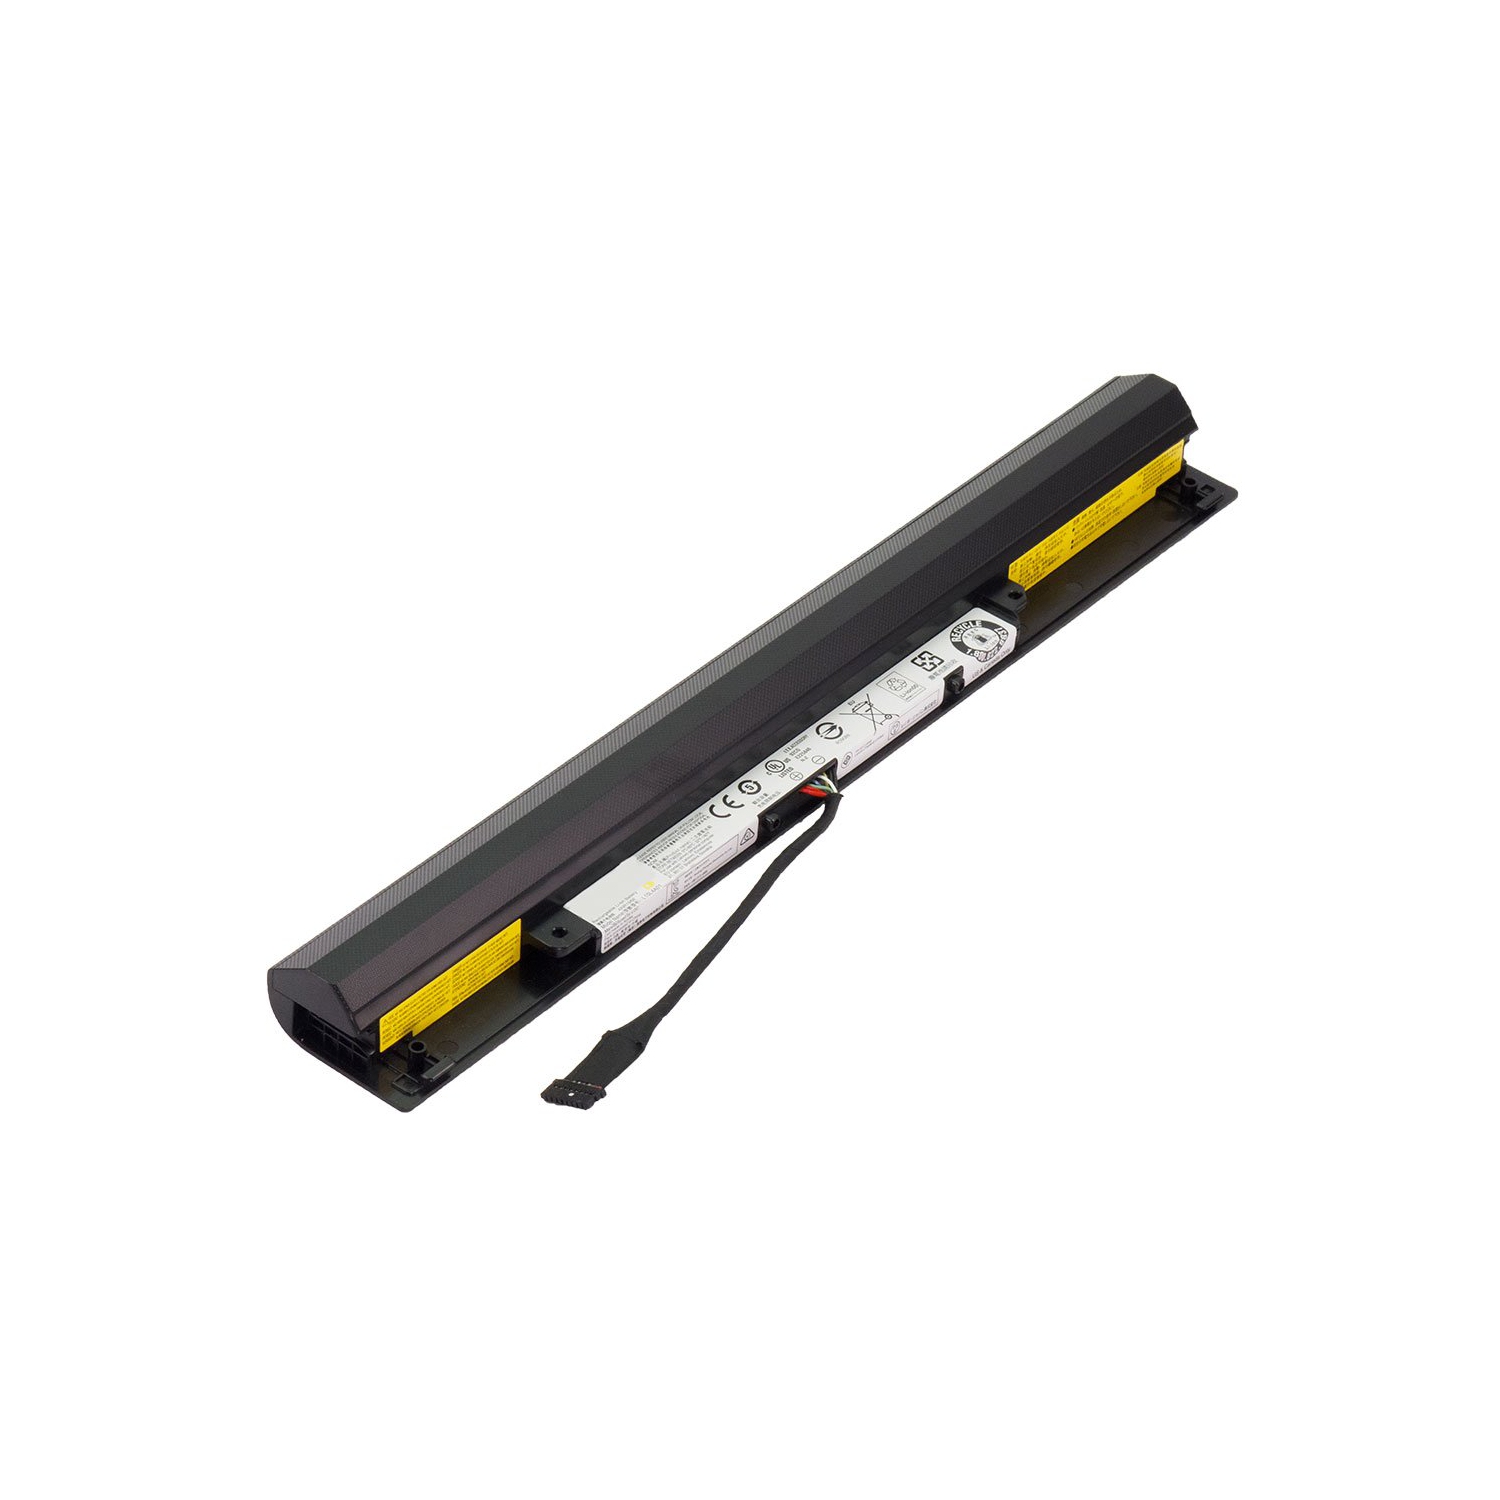 Laptop Battery Replacement for Lenovo IdeaPad 100-15IBD 80QQ018HGE, 41NR19/65, L15L4A01